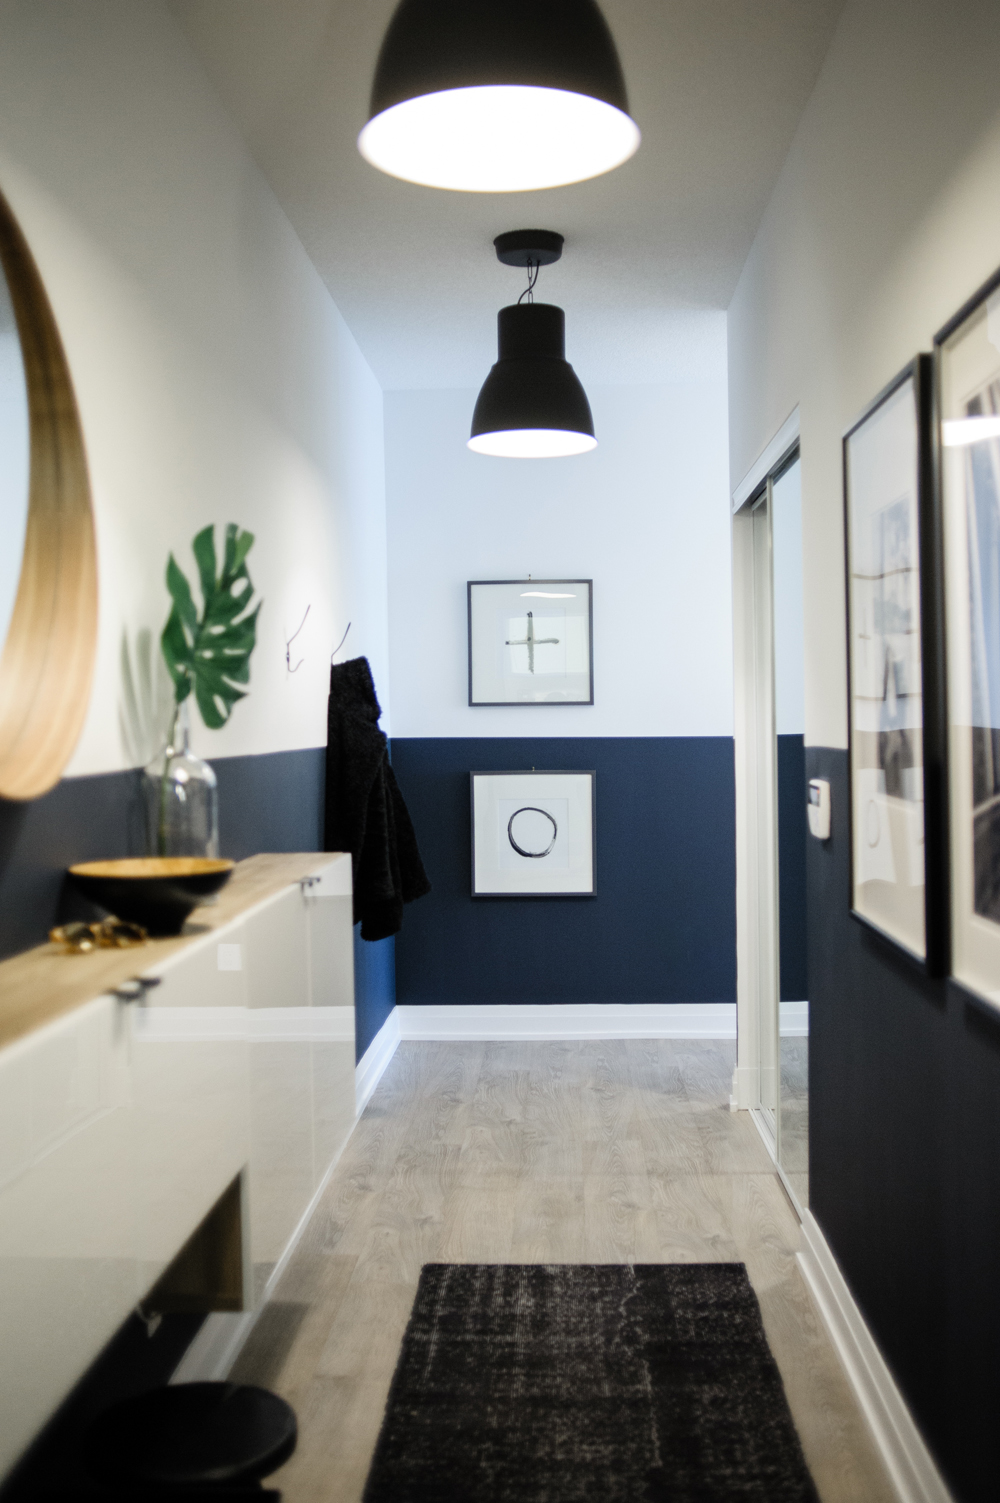 A long front entrance with half the wall painted in a deep navy blue and the rest in white